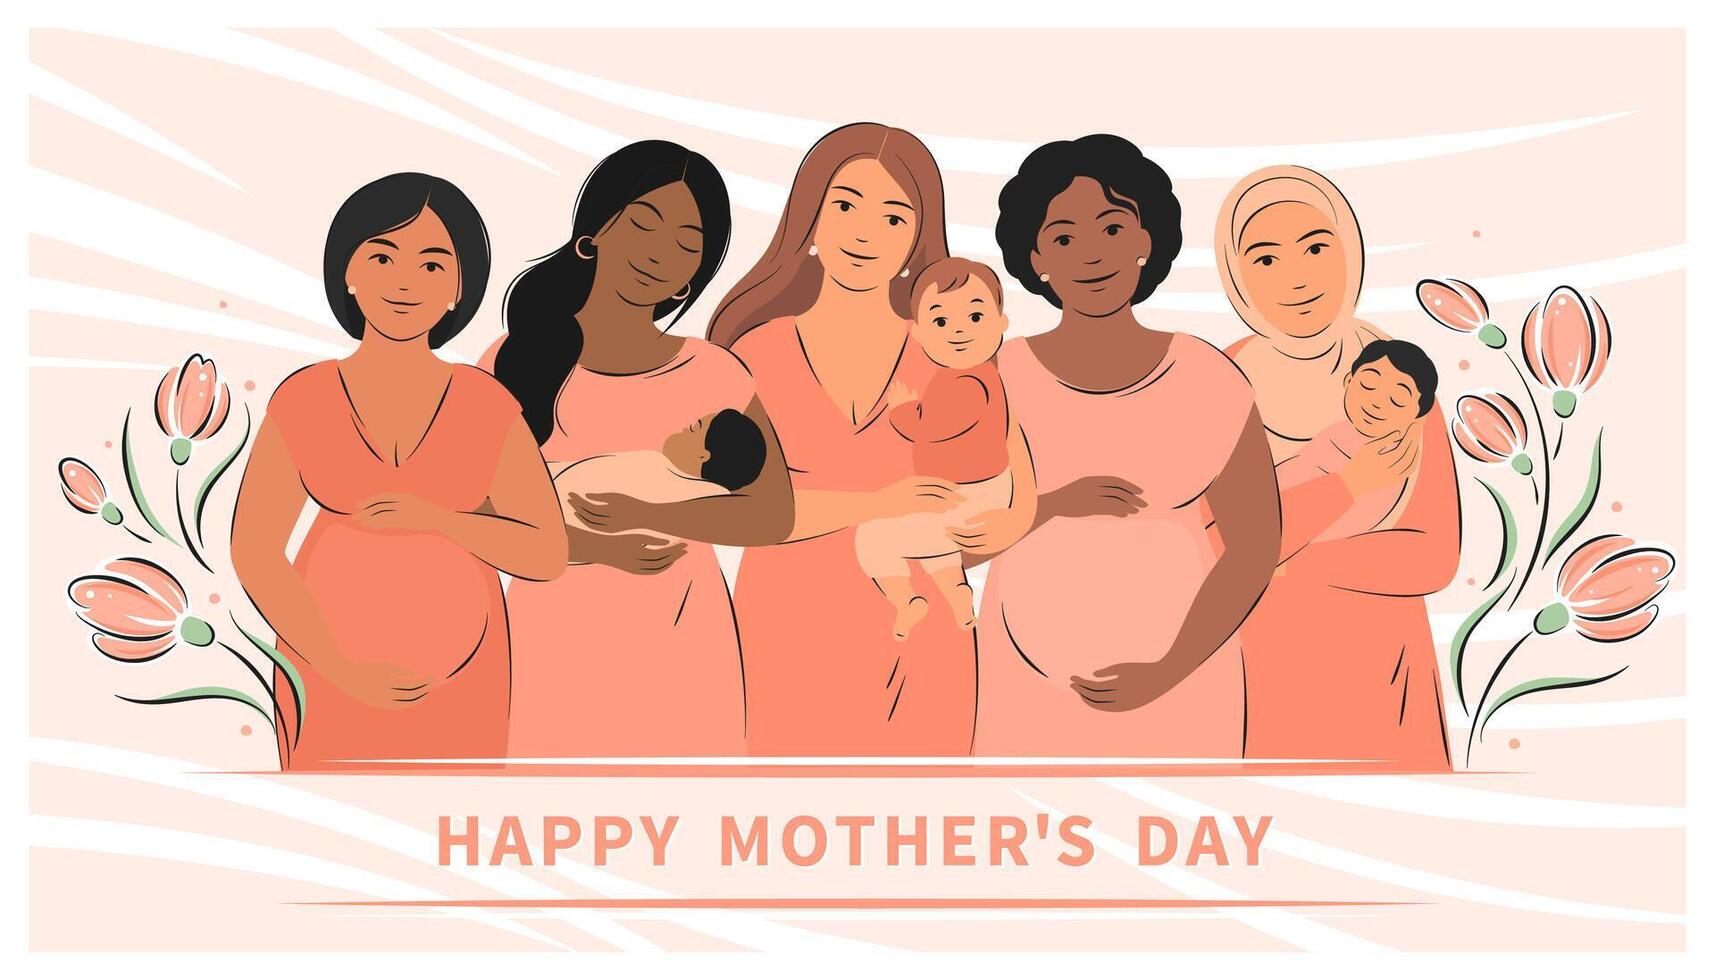 Happy mother's day. Group of pregnant women and women with children. Vector illustration